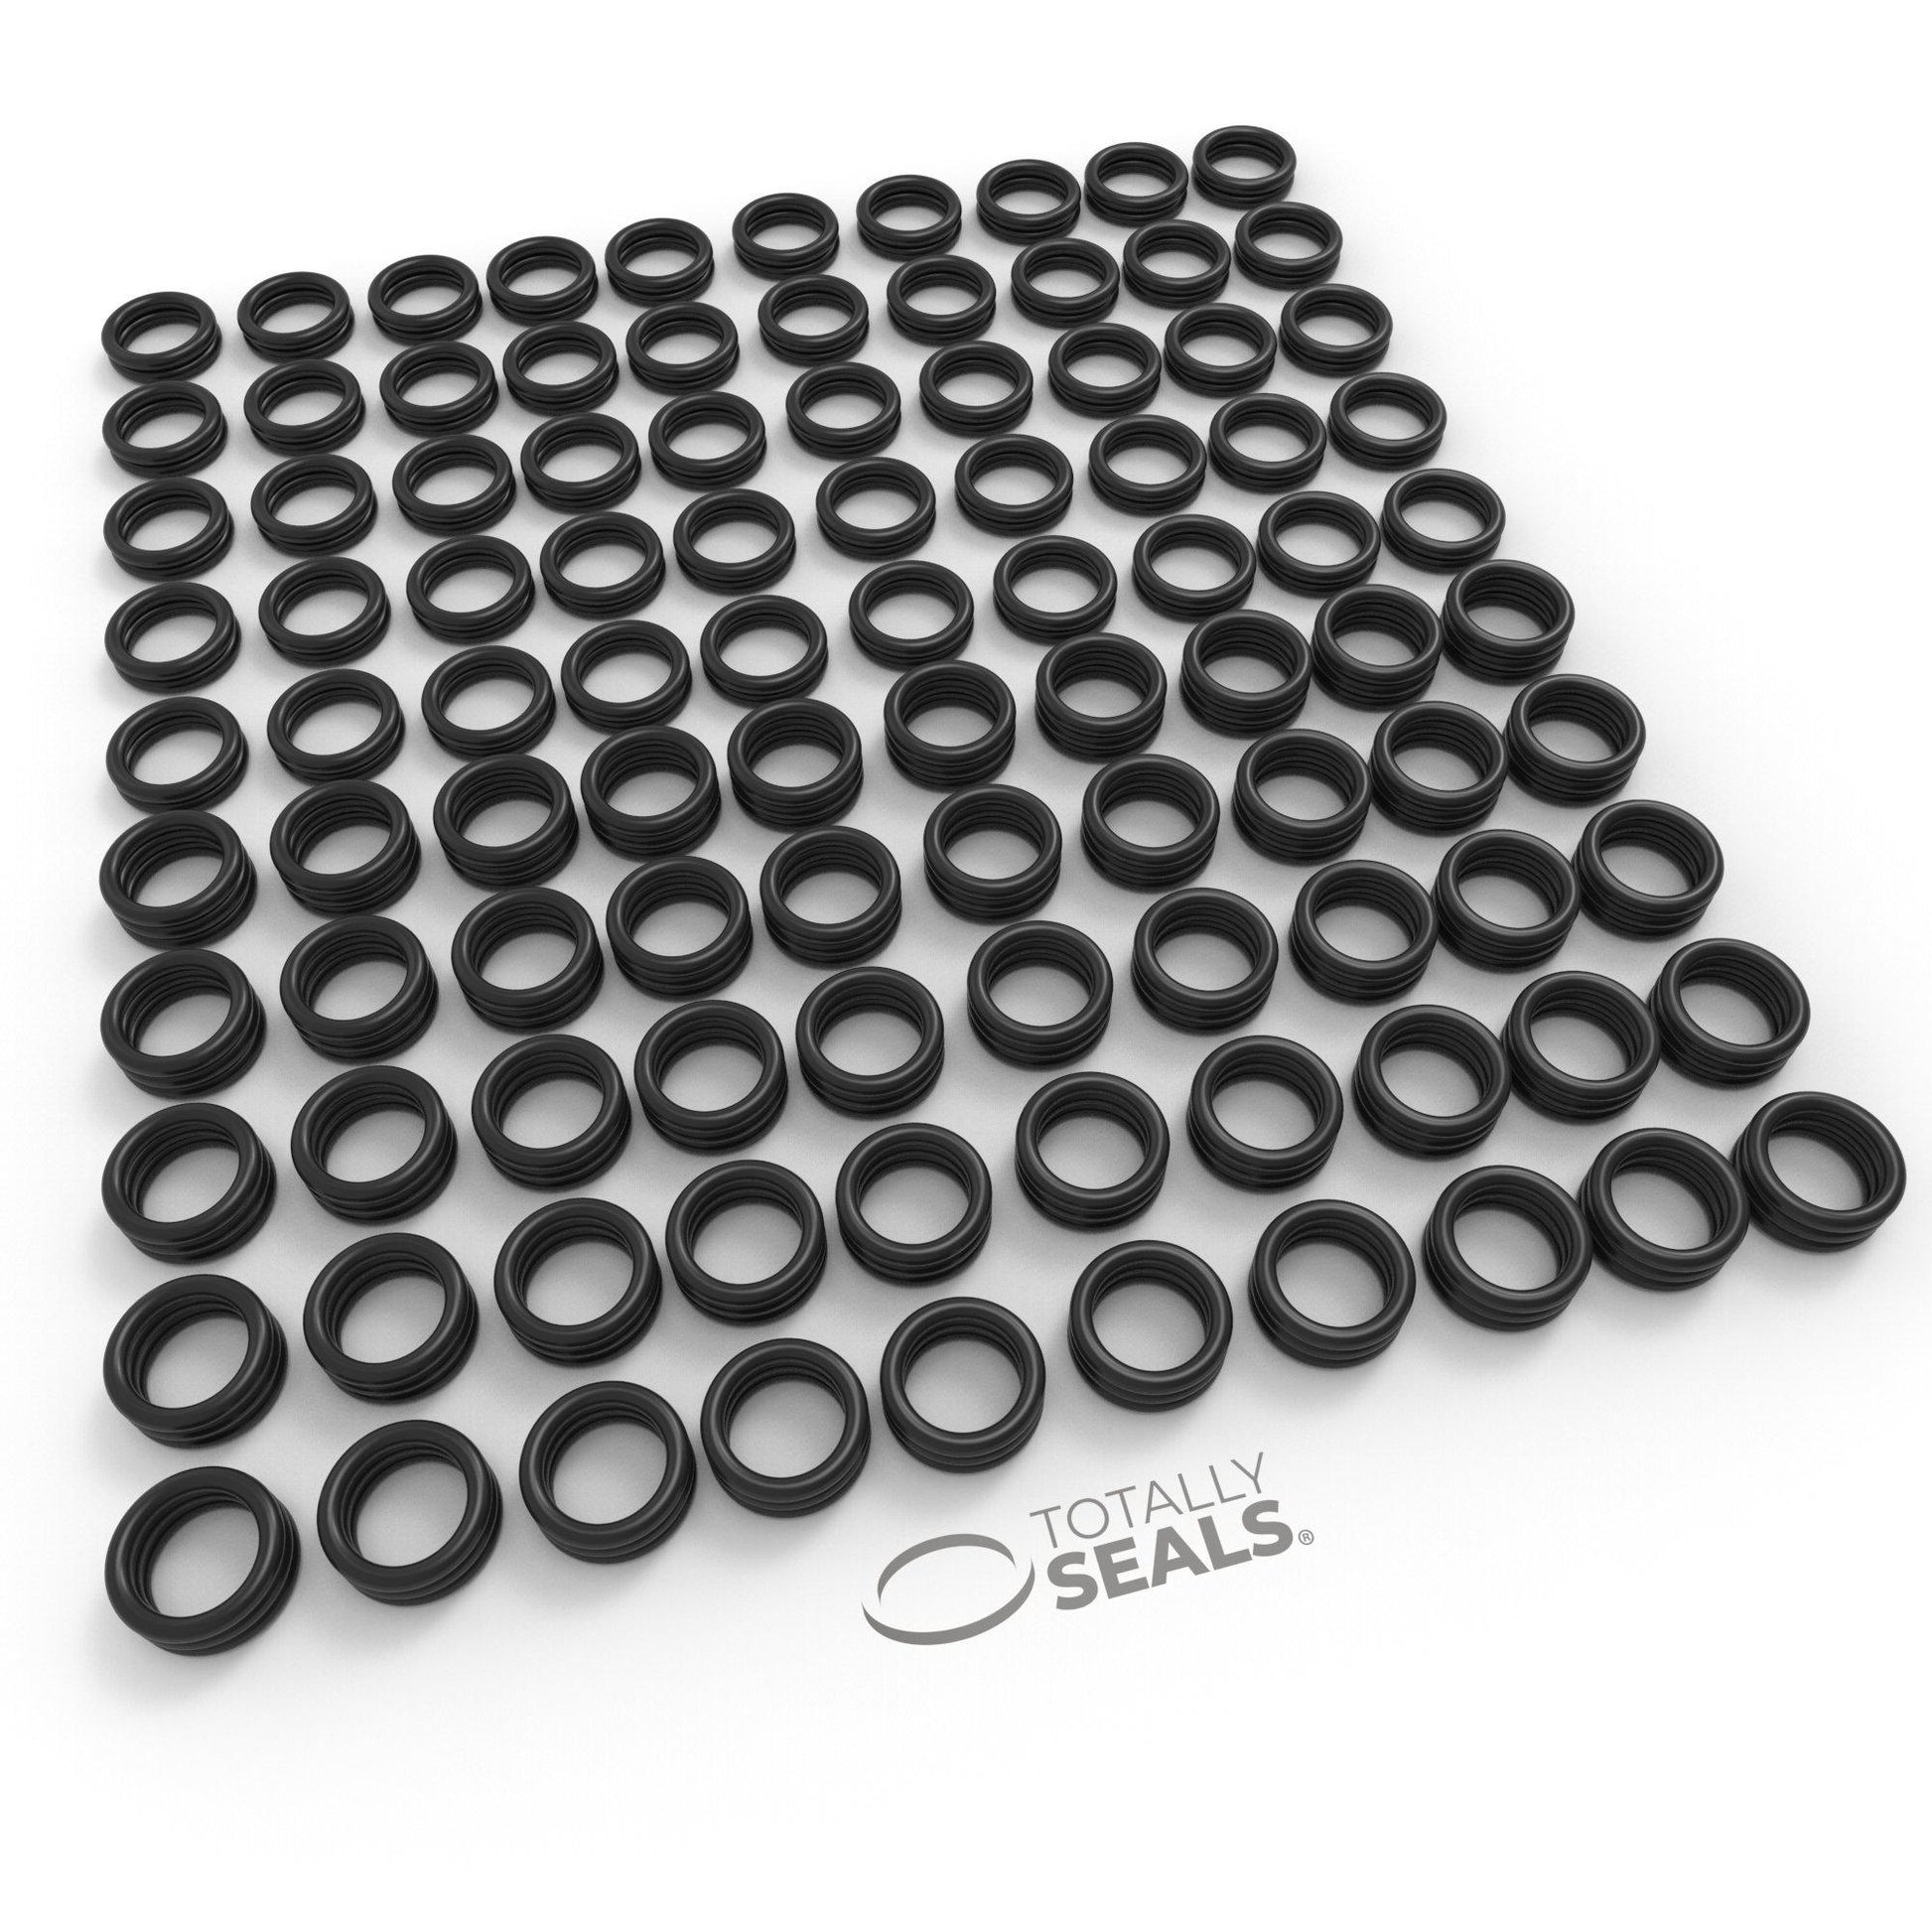 33mm x 2mm (37mm OD) Nitrile O-Rings - Totally Seals®